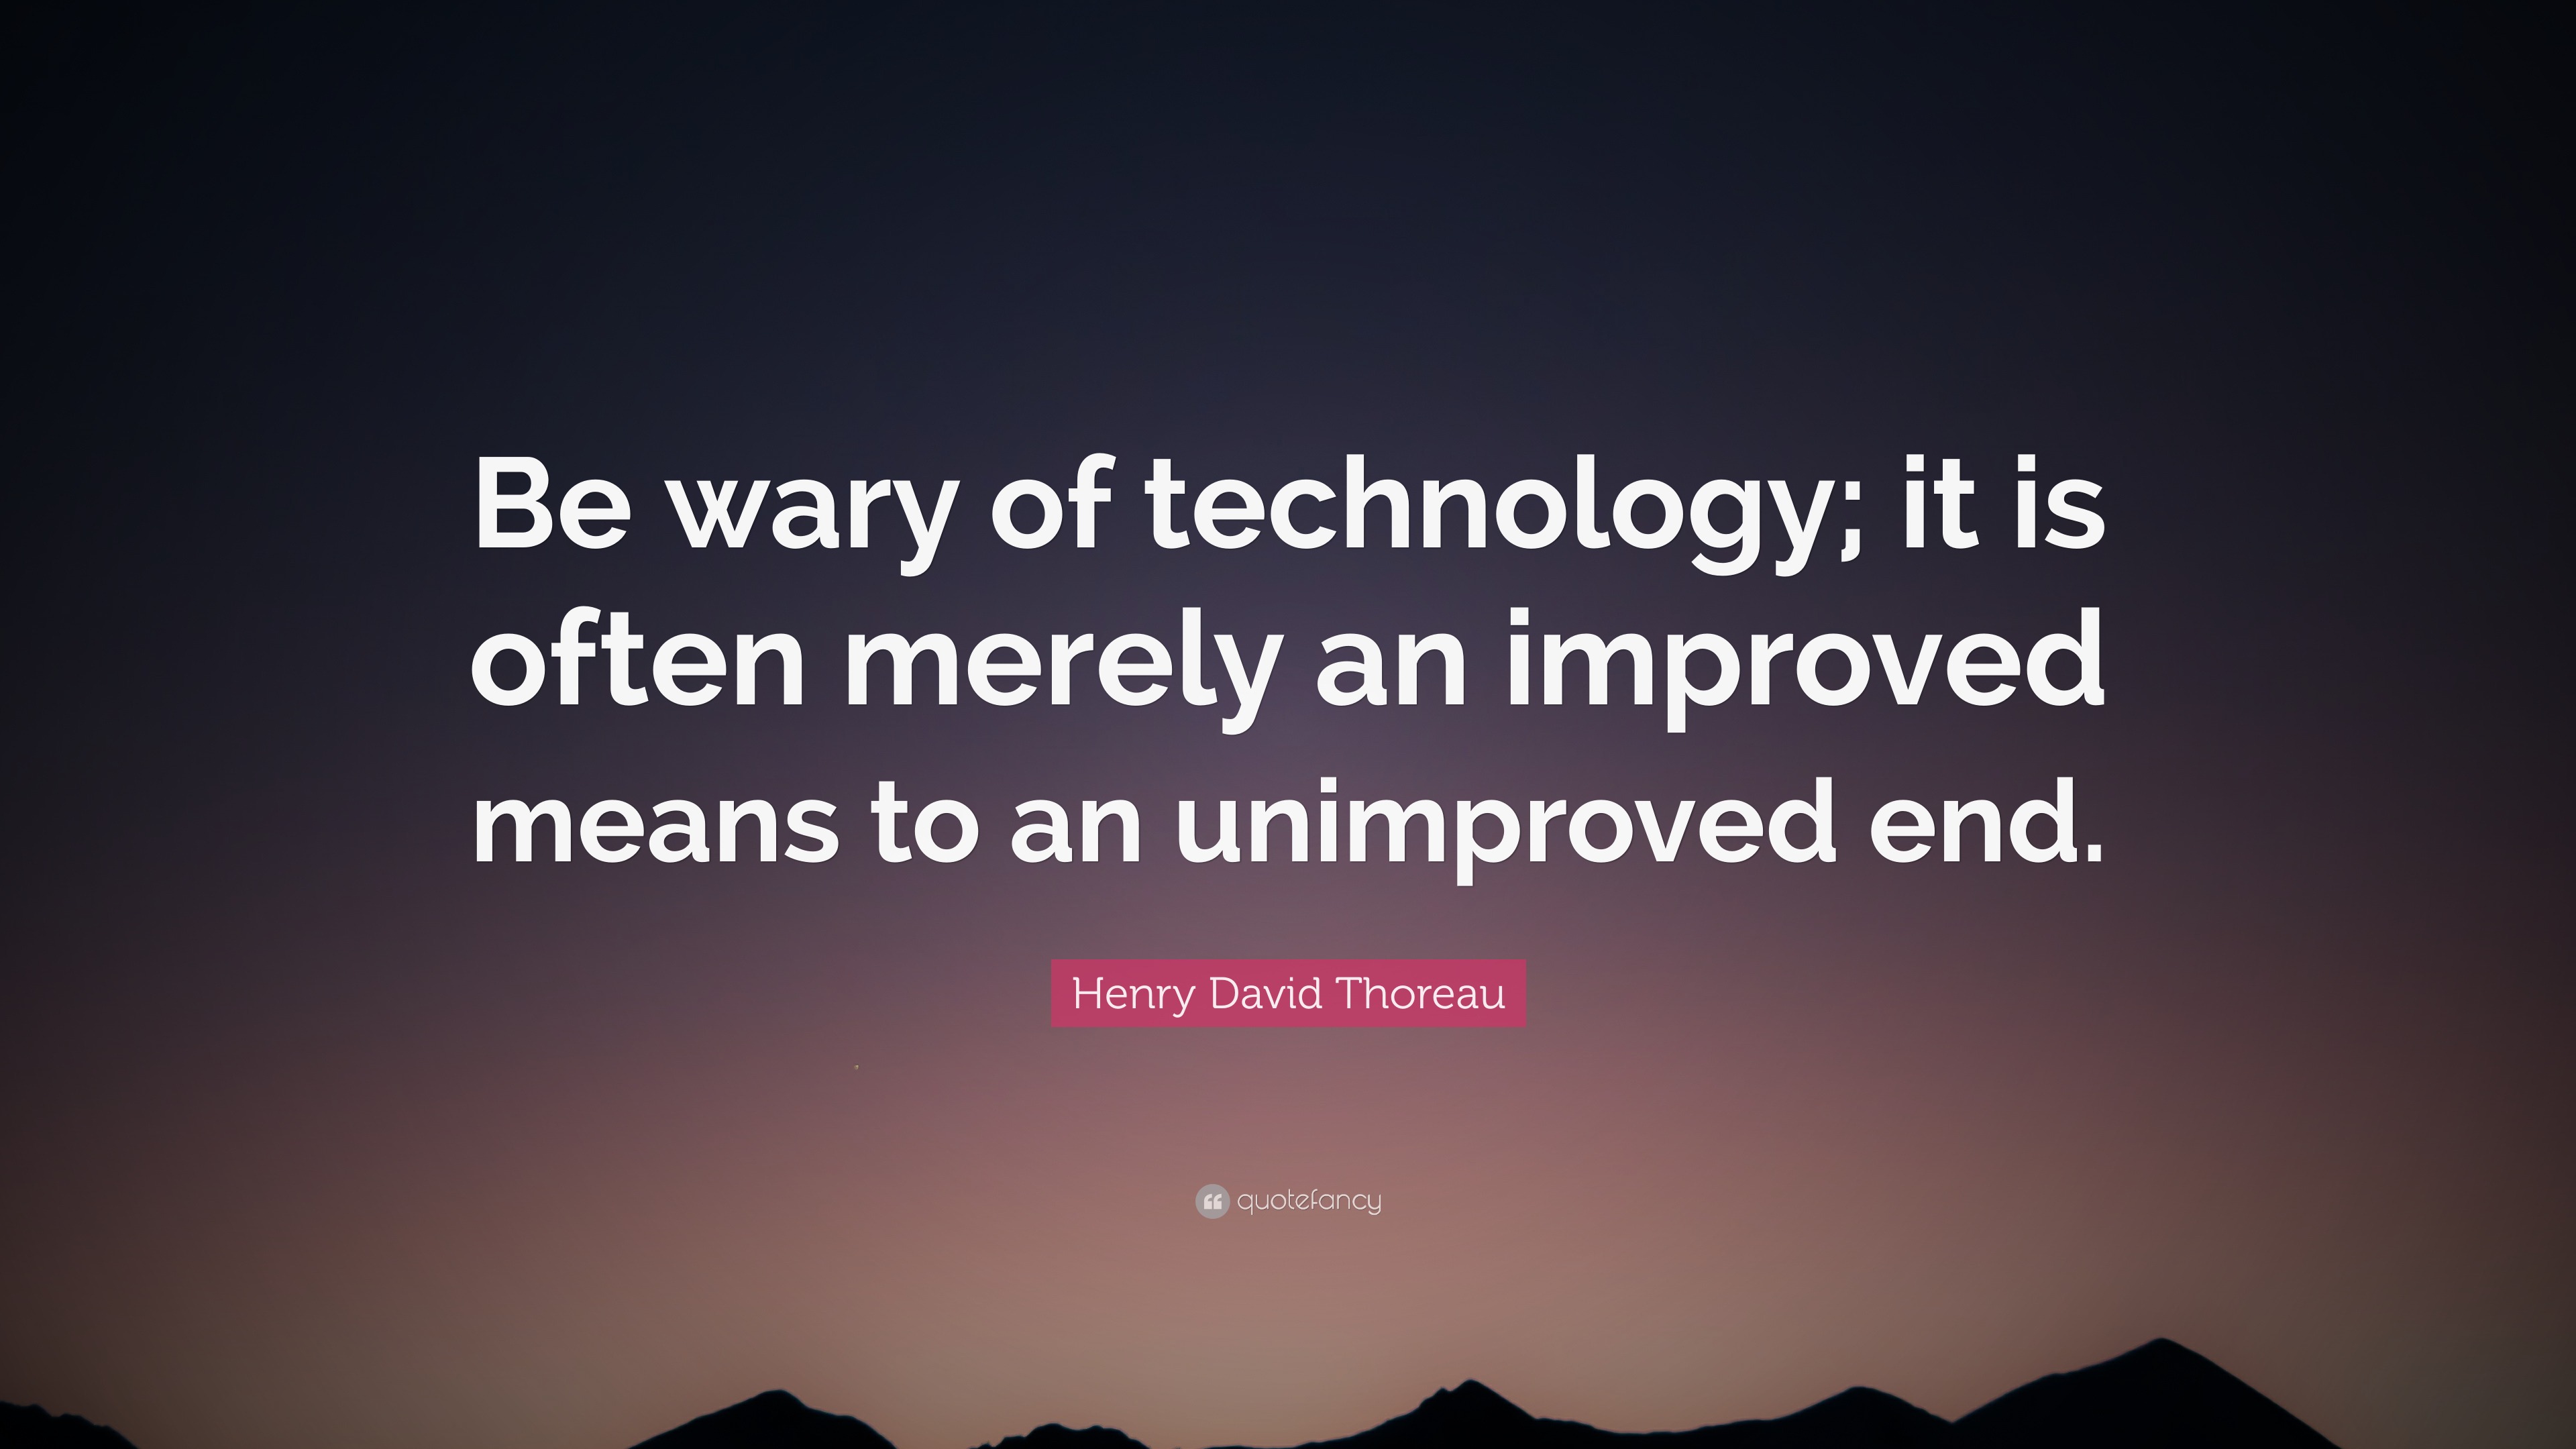 Henry David Thoreau Quote: “Be wary of technology; it is often merely ...